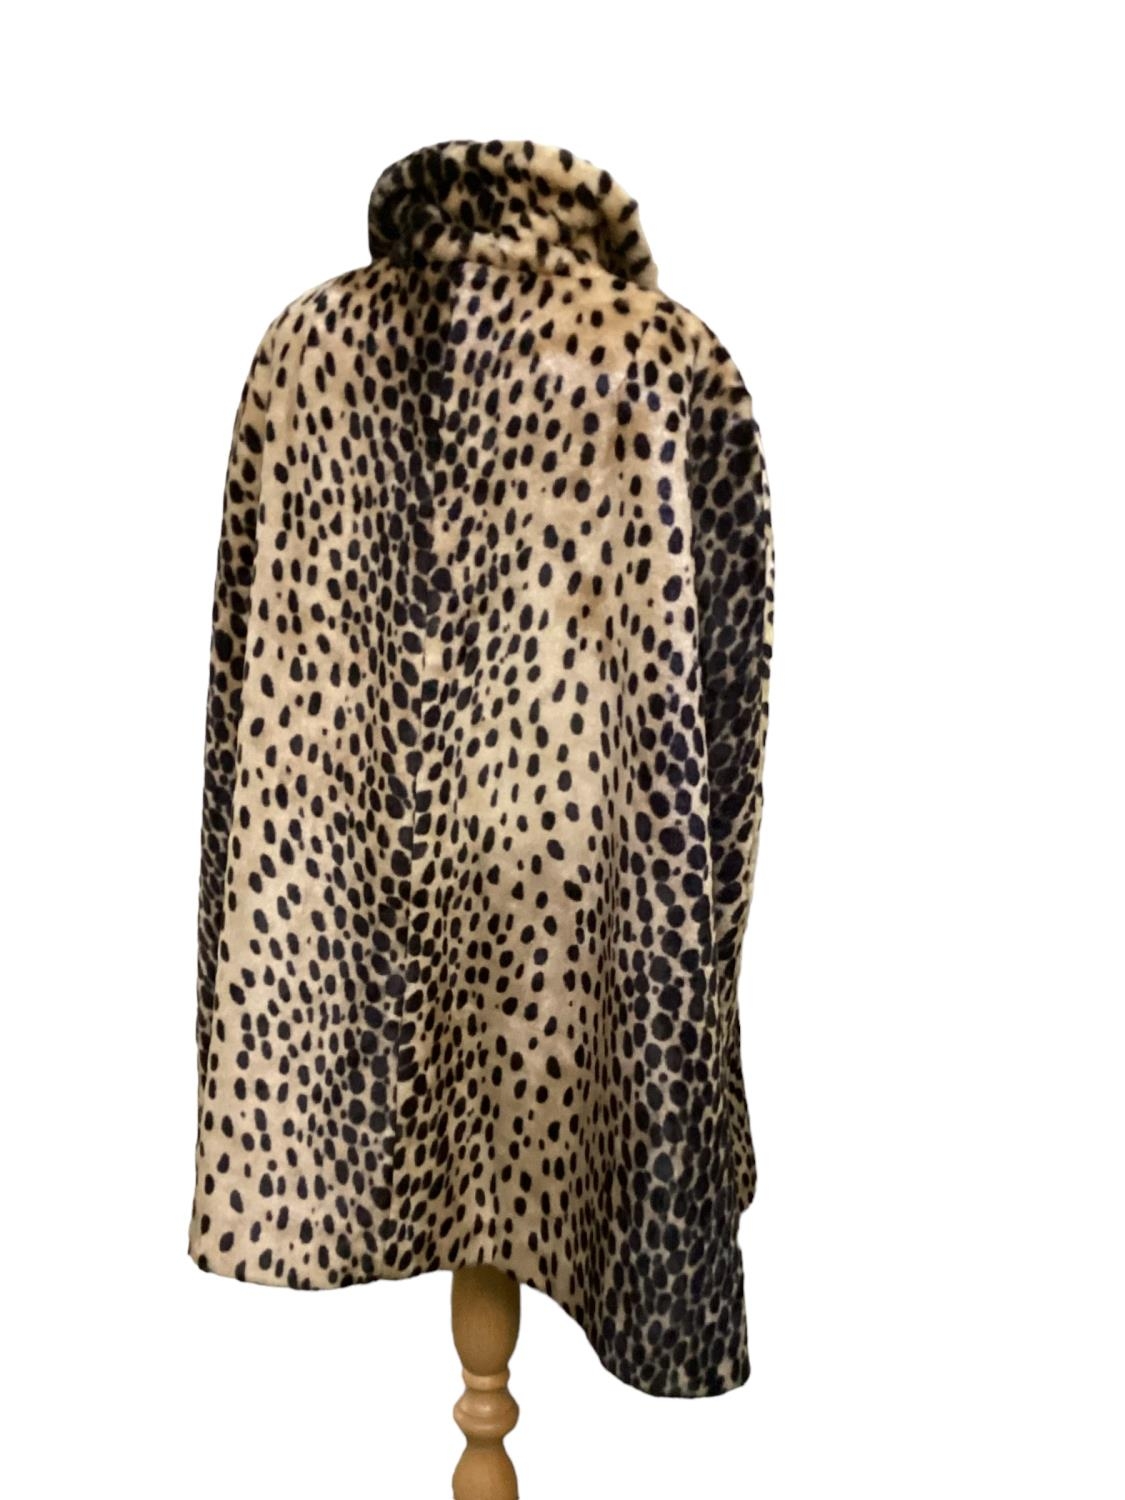 BIBA reversible camel wool and faux leopard print cape, good condition (buttons slightly loose) - Image 5 of 5